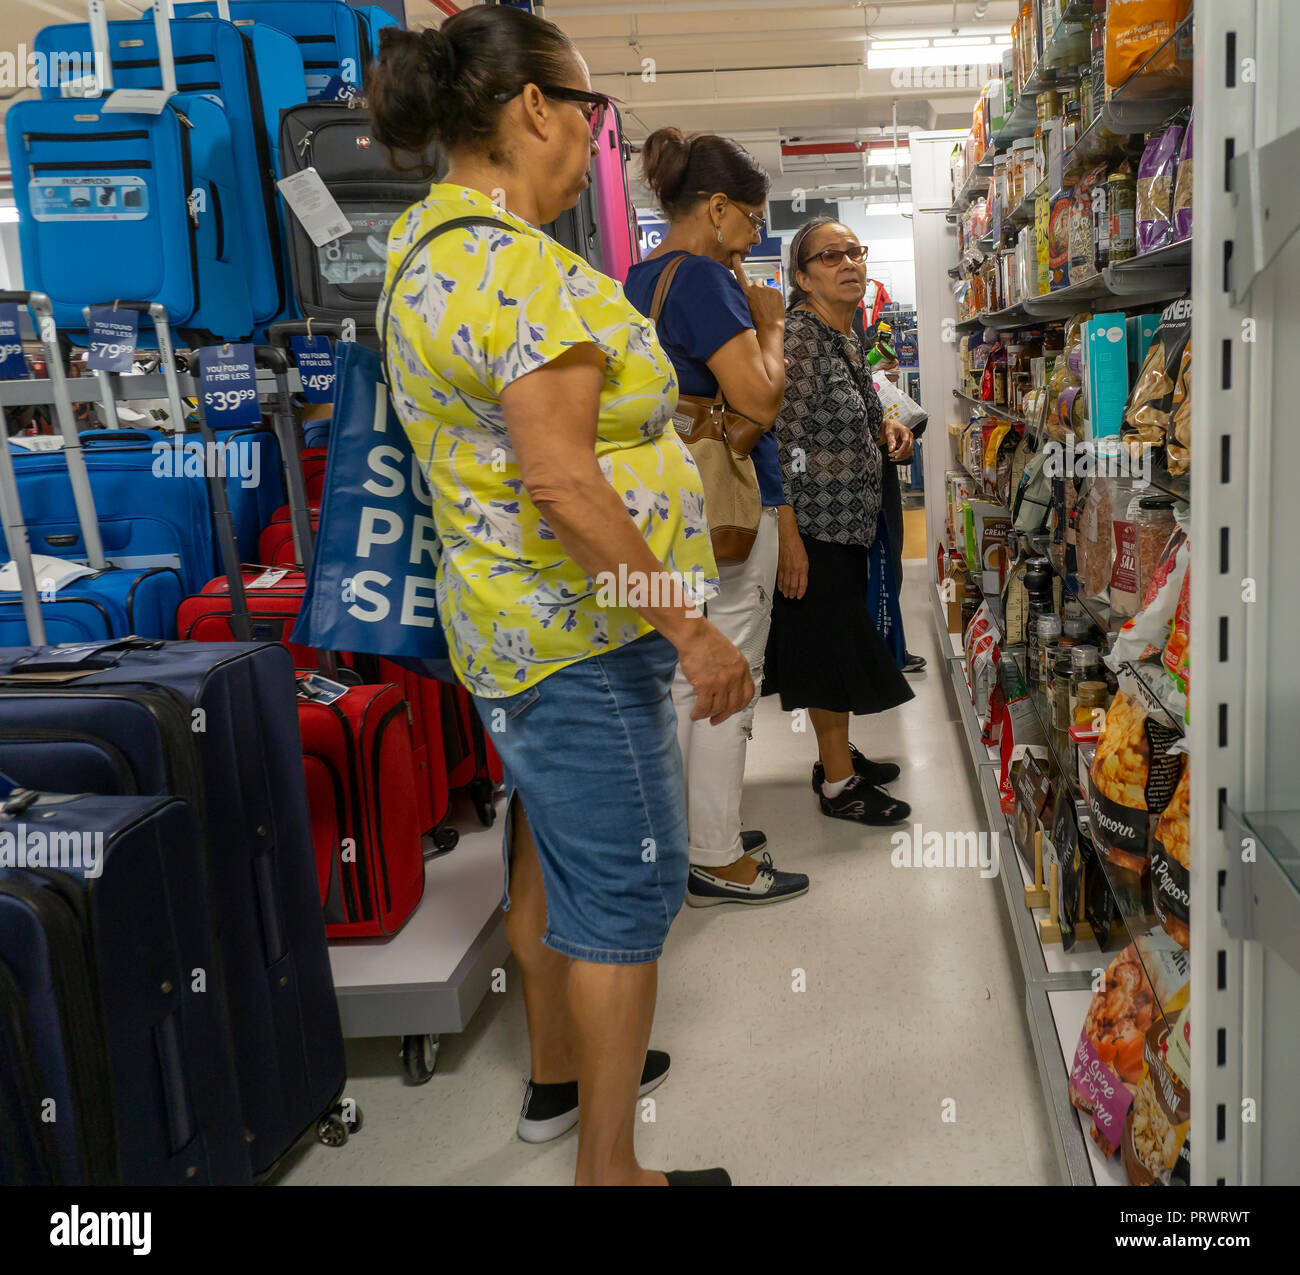 New York, USA. 4th October, 2018. Customers in the brand new off-price Marshalls store in the Lower East Side neighborhood of in New York during it's grand opening on Thursday, October 4, 2018. Marshalls is a brand of the TJX Companies, parent of Marshalls, T. J. Maxx, HomeGoods and other brands. TJX Companies recently reported comps that grew 6% over year citing increased traffic in its Marmaxx division (Marshalls, TX Maxx). (Â© Richard B. Levine) Credit: Richard Levine/Alamy Live News Stock Photo